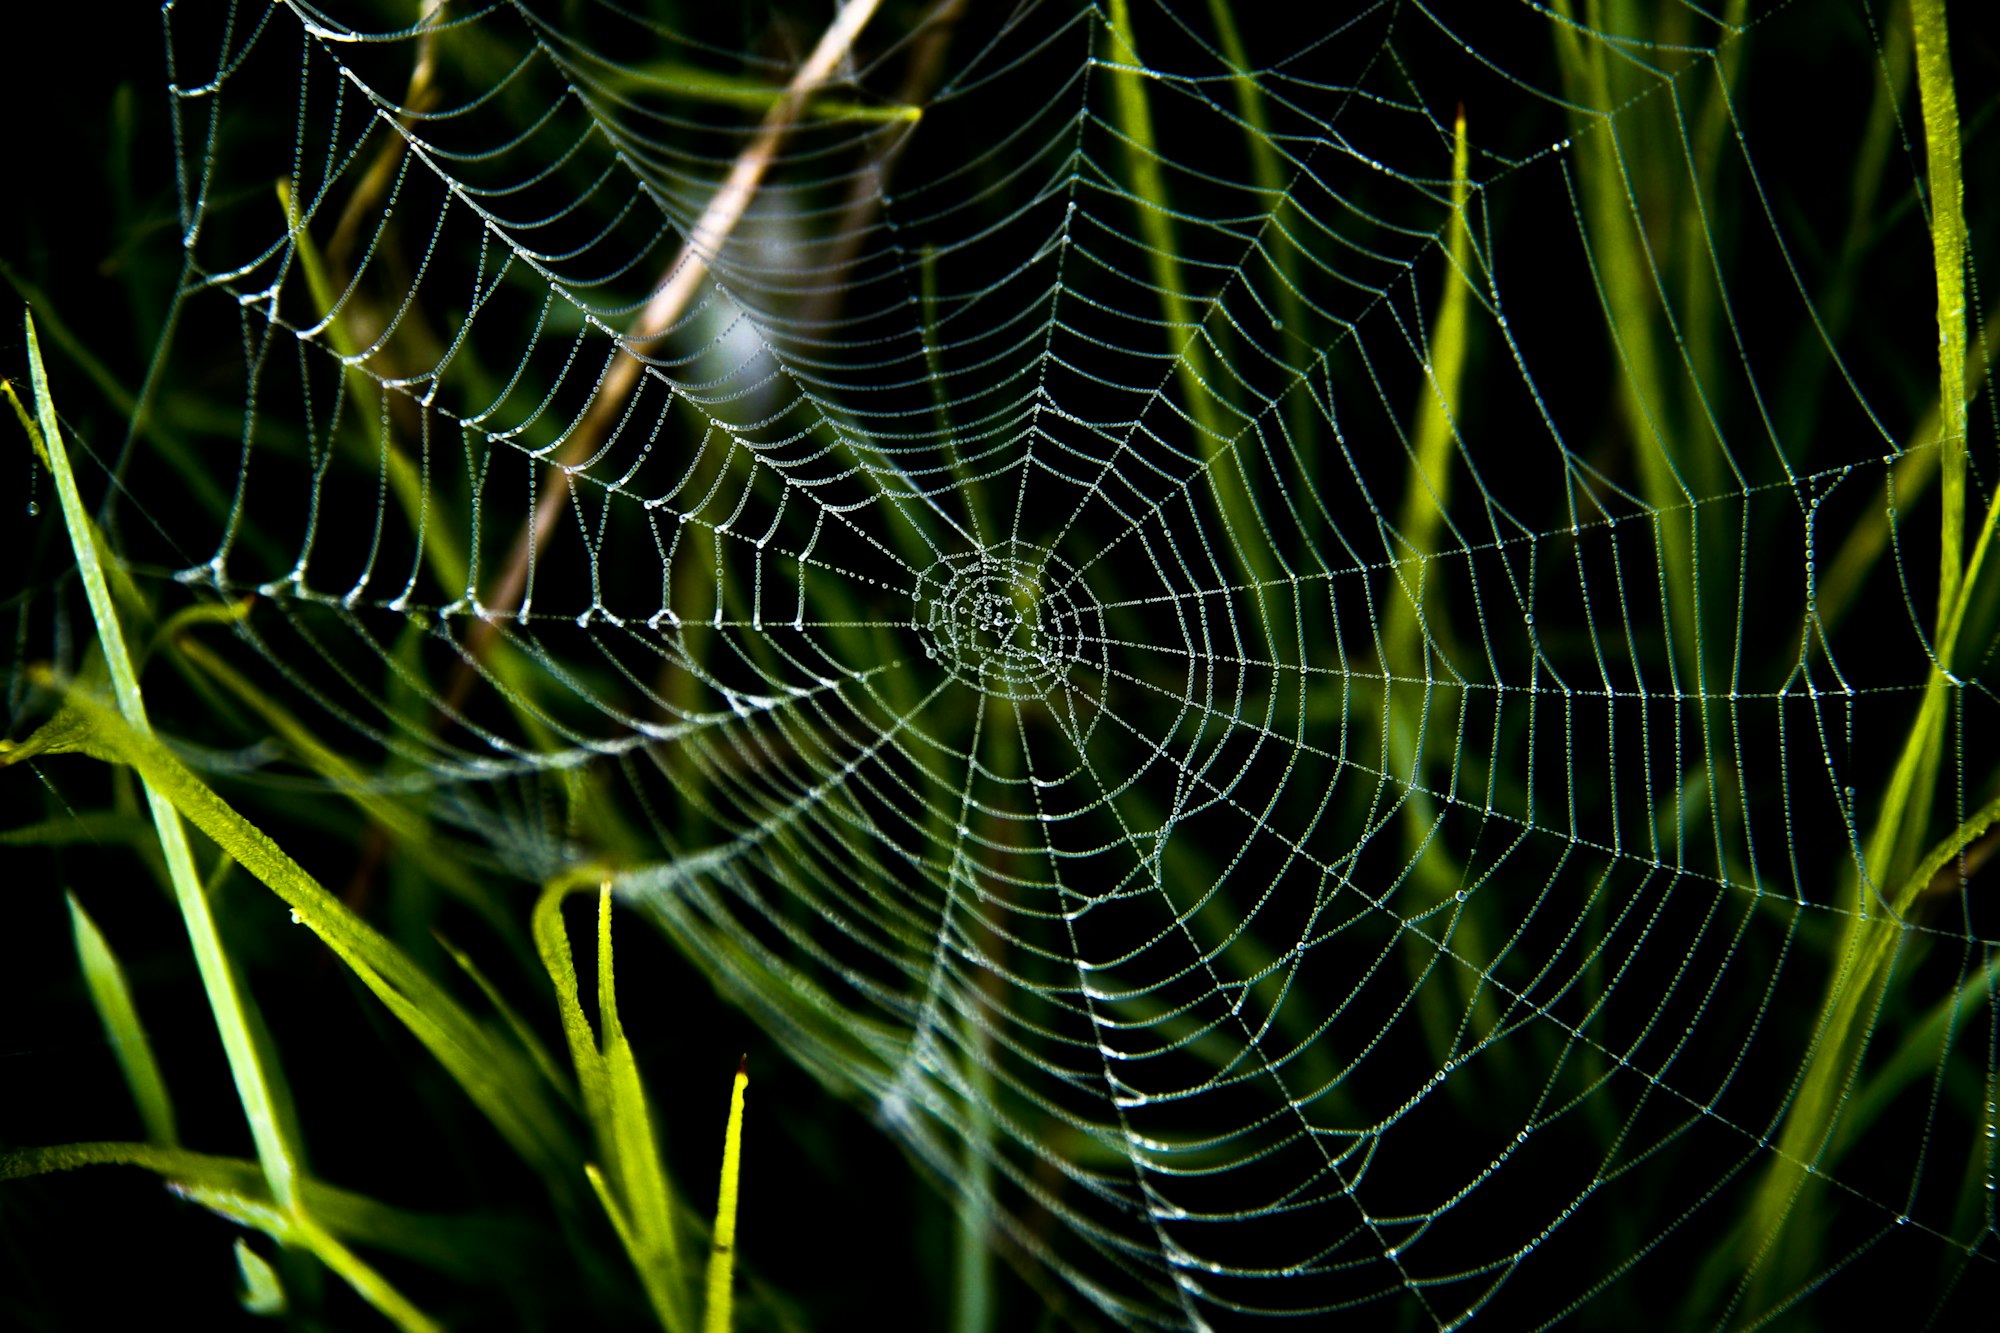 A spider’s web with droplets of dew on the silk strands.